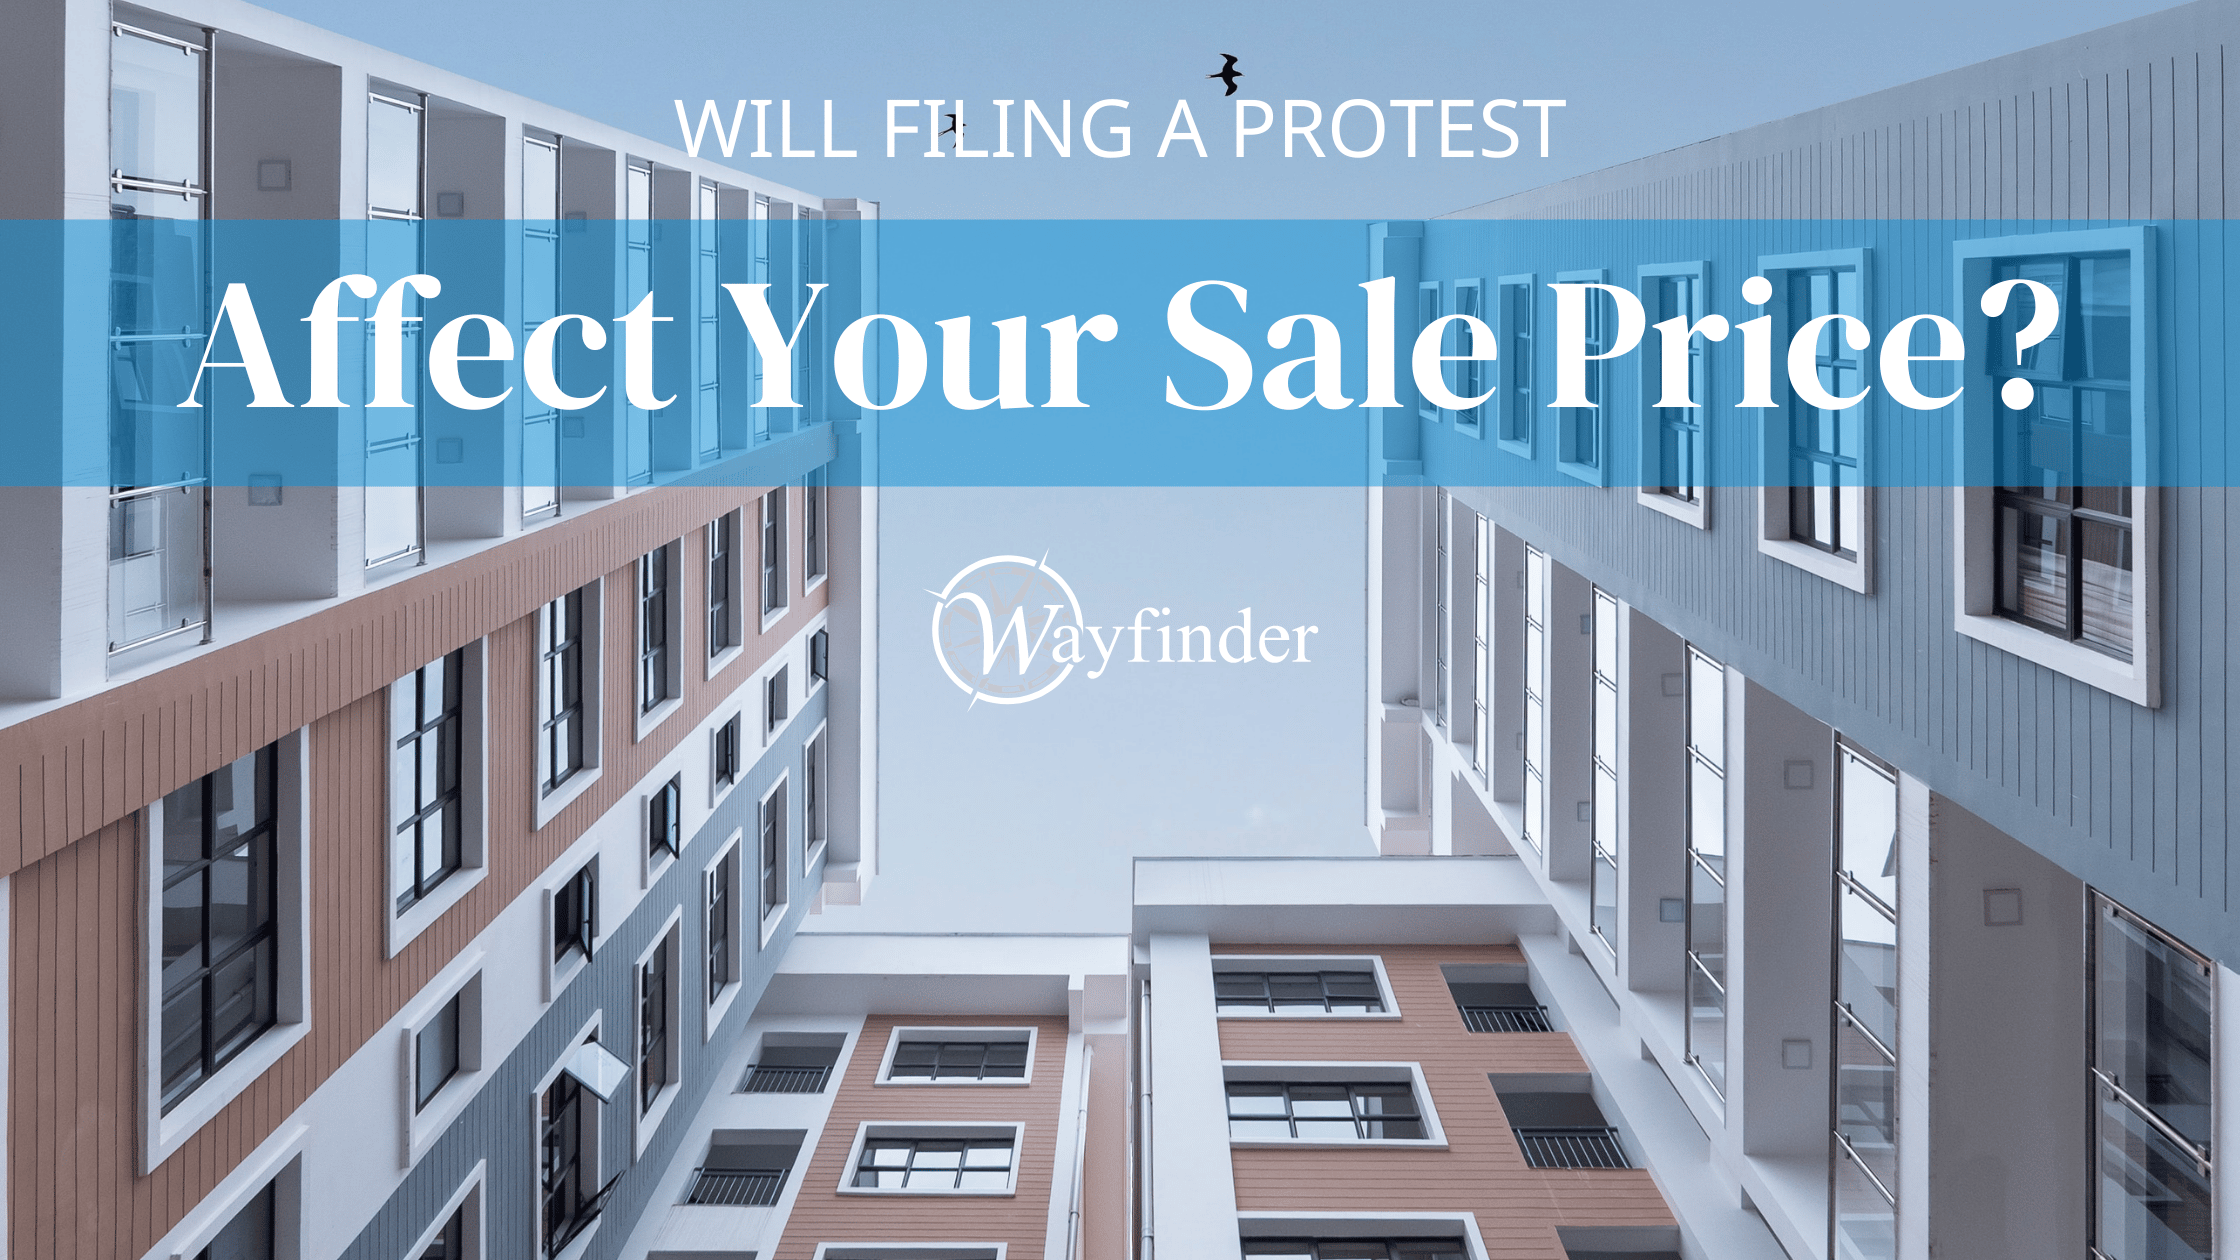 Will Filing a Protest Affect My Sale Price